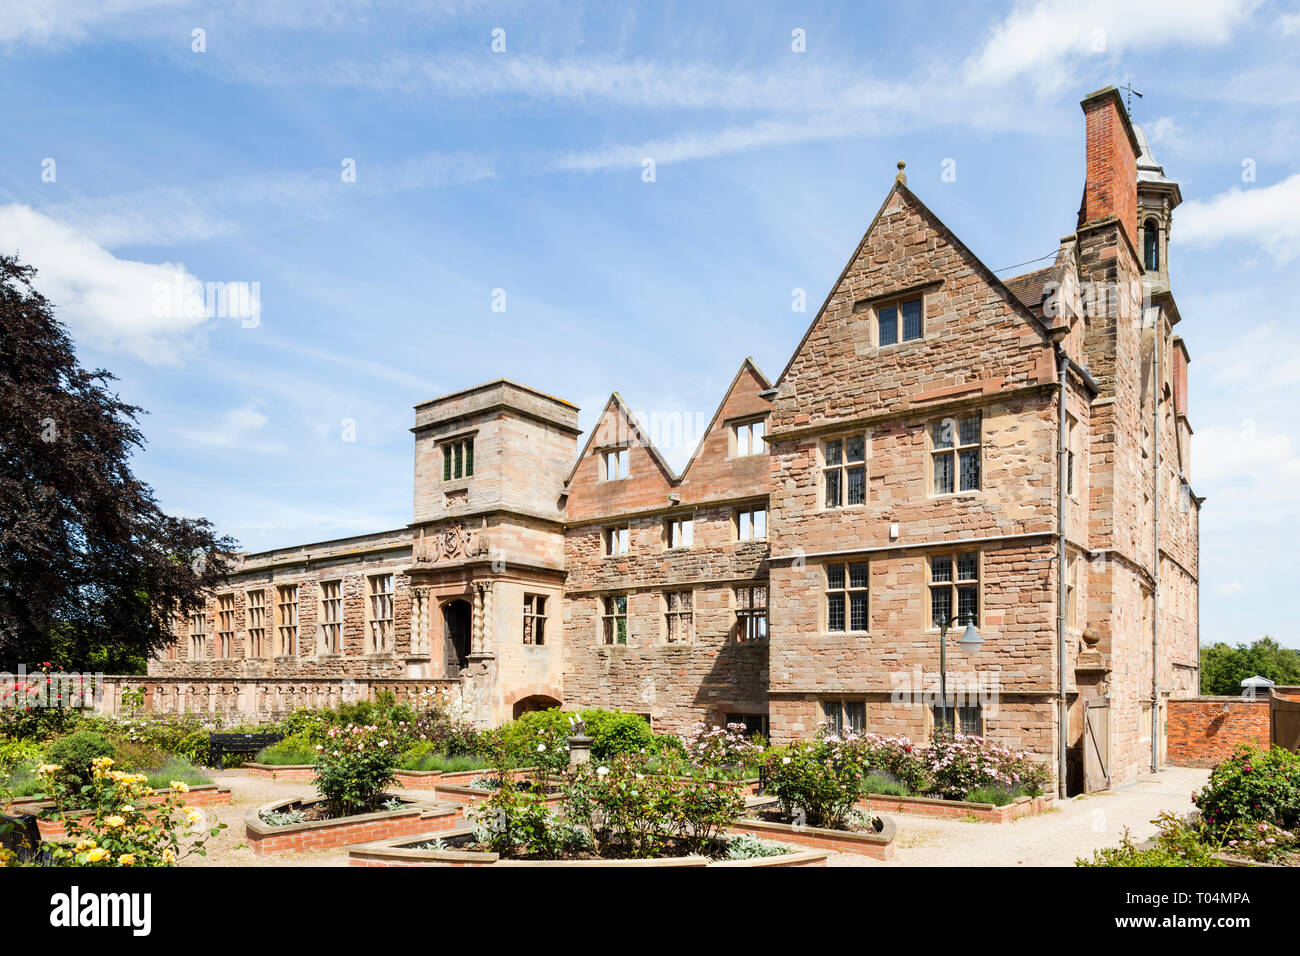 Rufford Abbey, a 12th century Cistercian abbey at Rufford Abbey Country Park, Nottinghamshire, England, UK Stock Photo